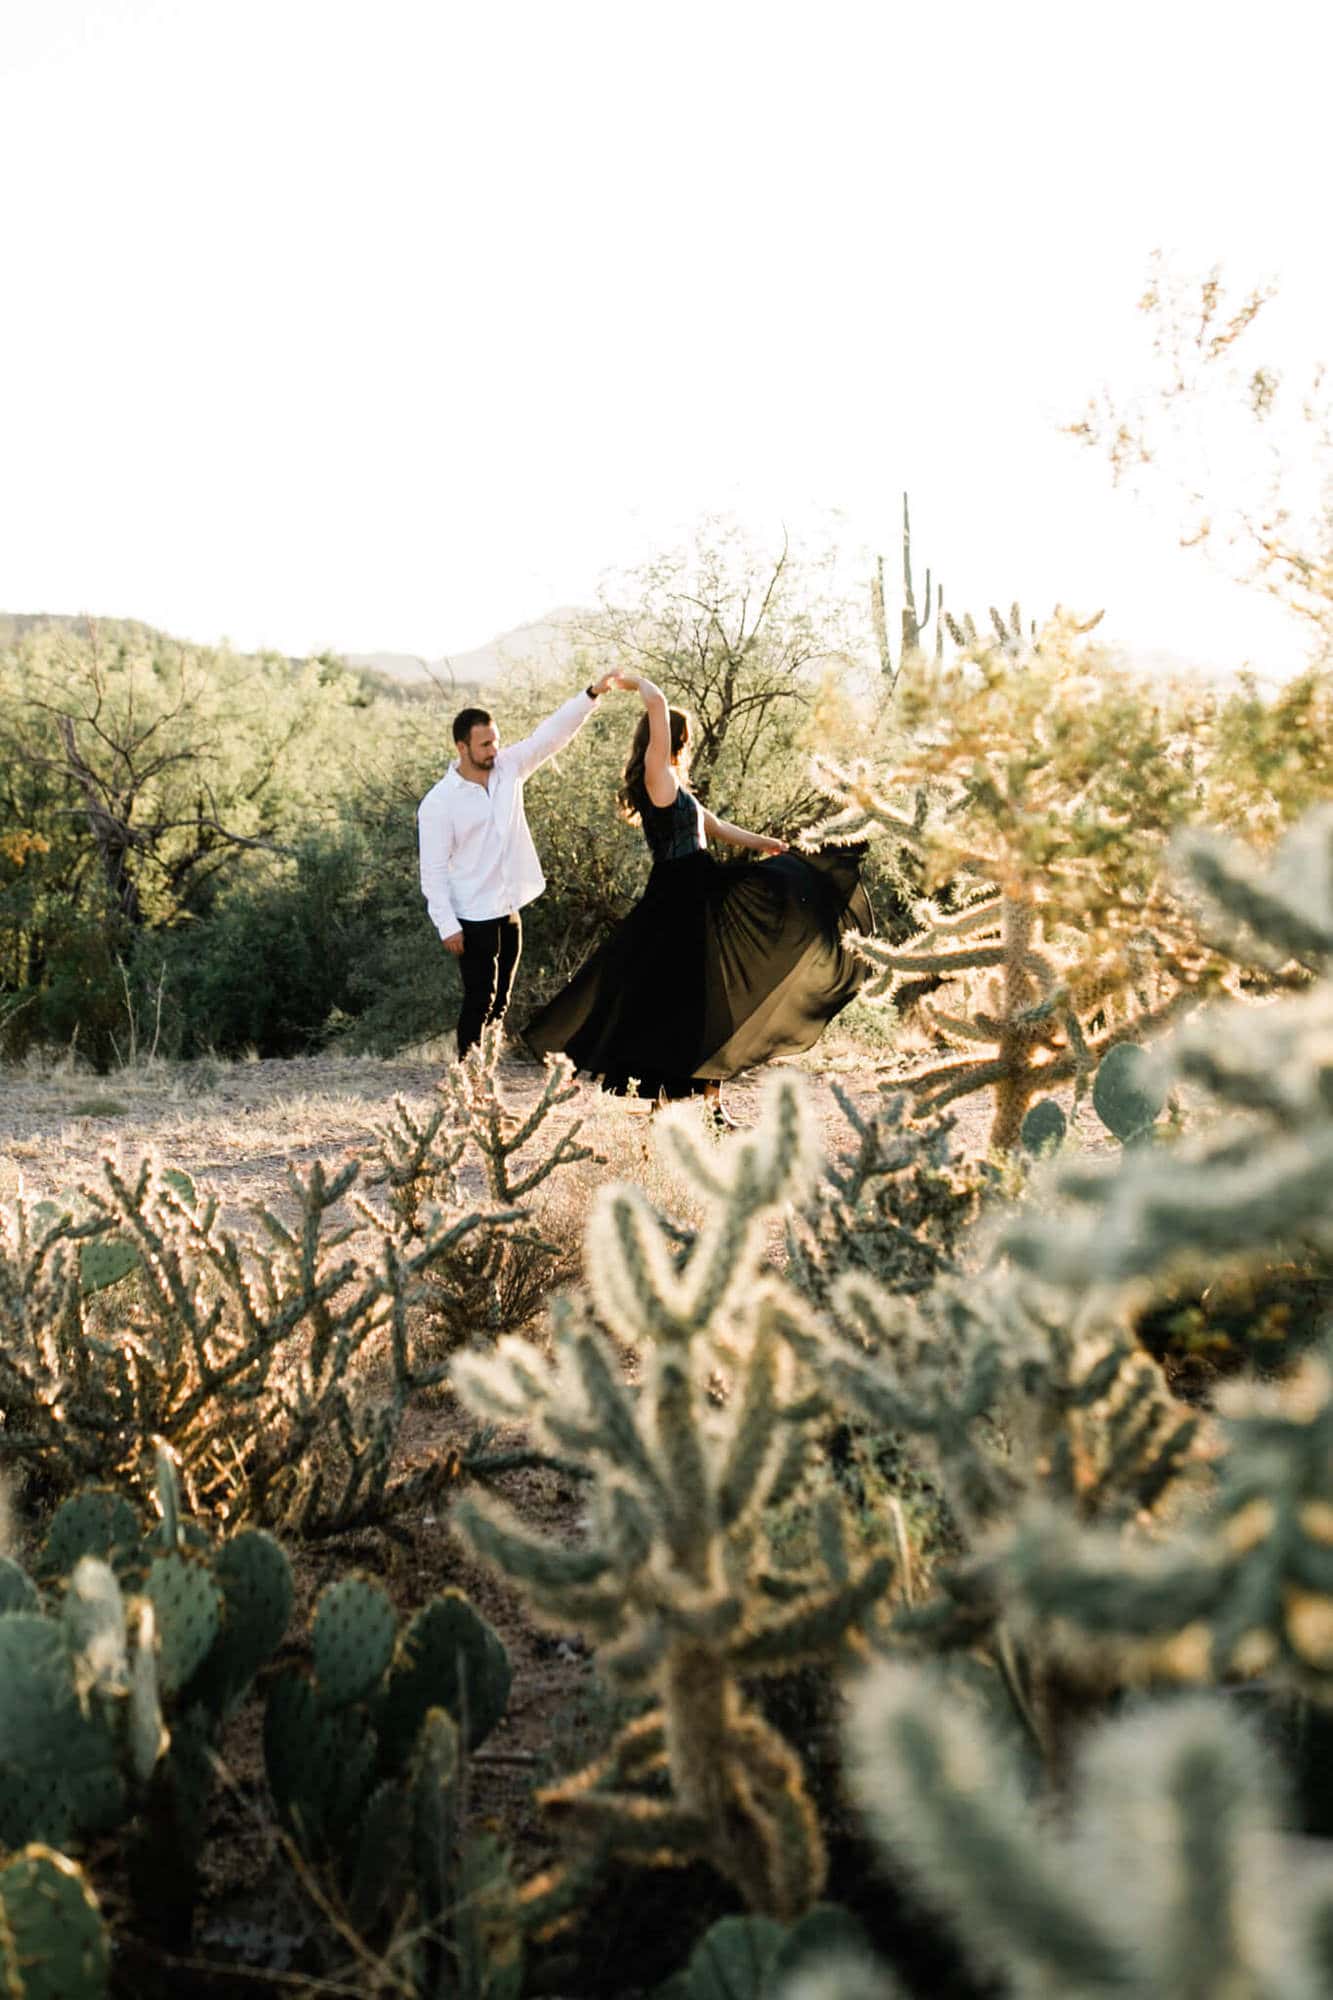 Logan and Nicole dance among the cactus during their adventure session.